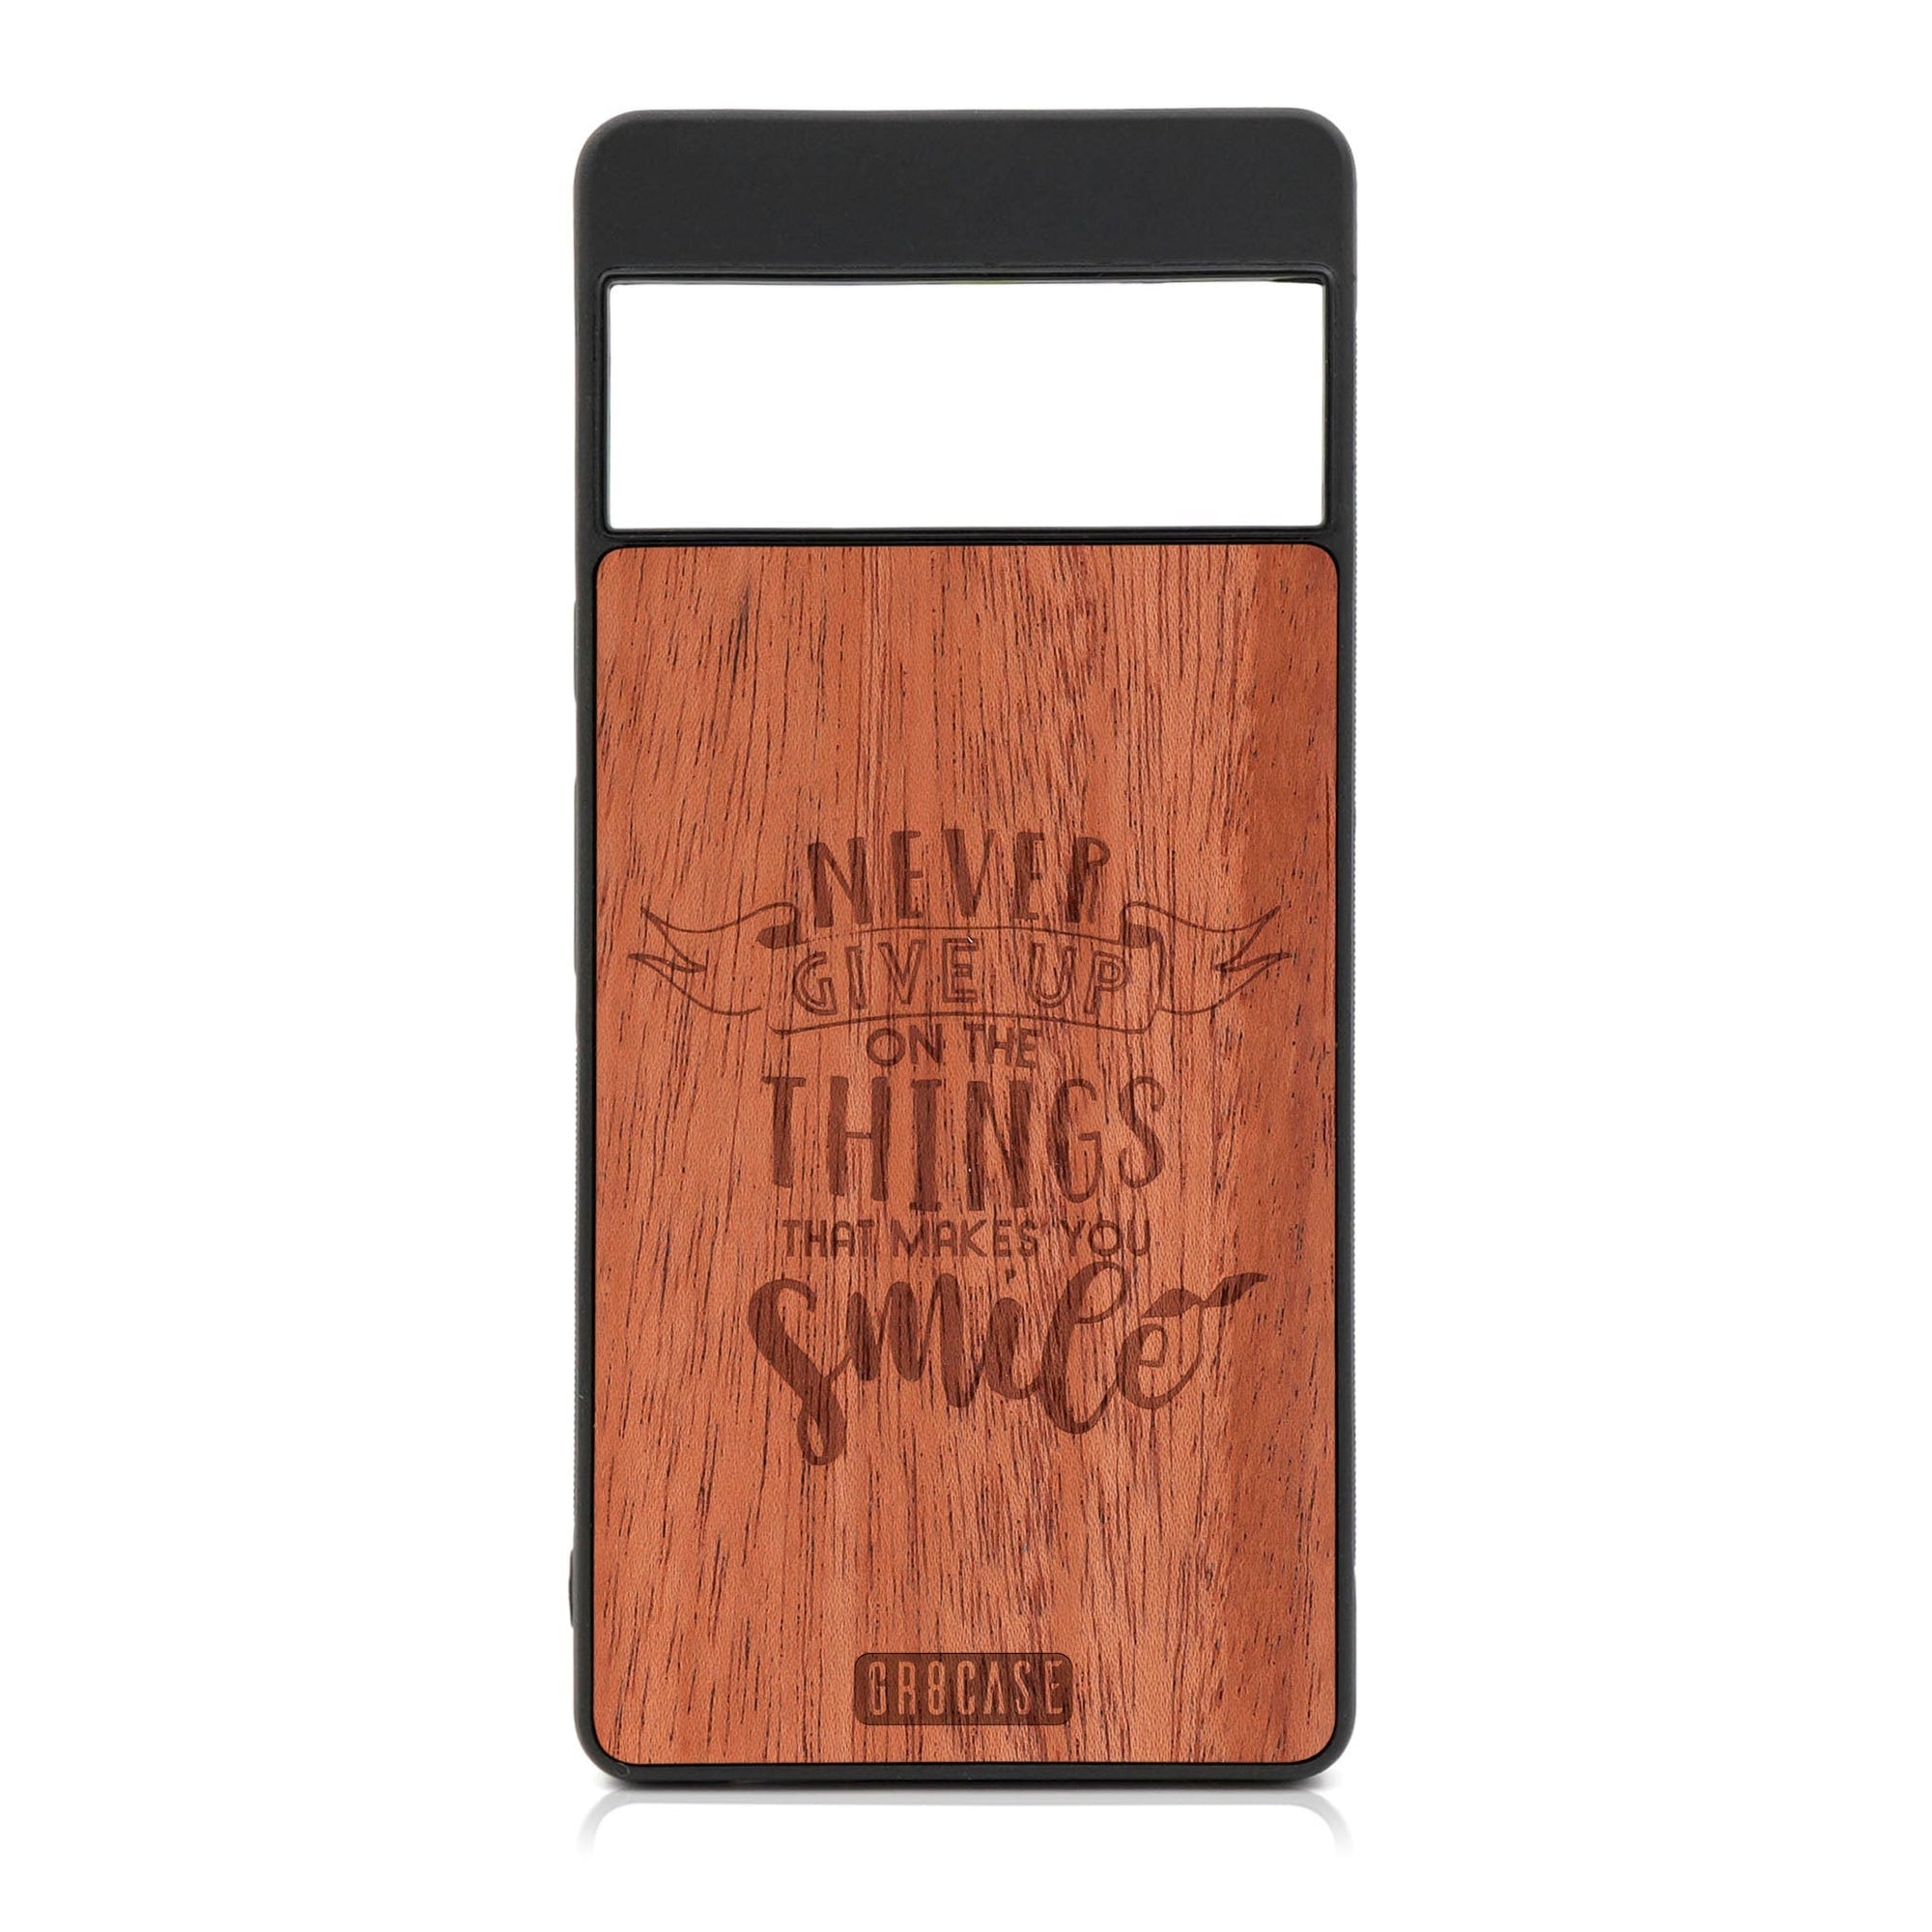 Never Give Up On The Things That Make You Smile Design Wood Case For Google Pixel 7 Pro